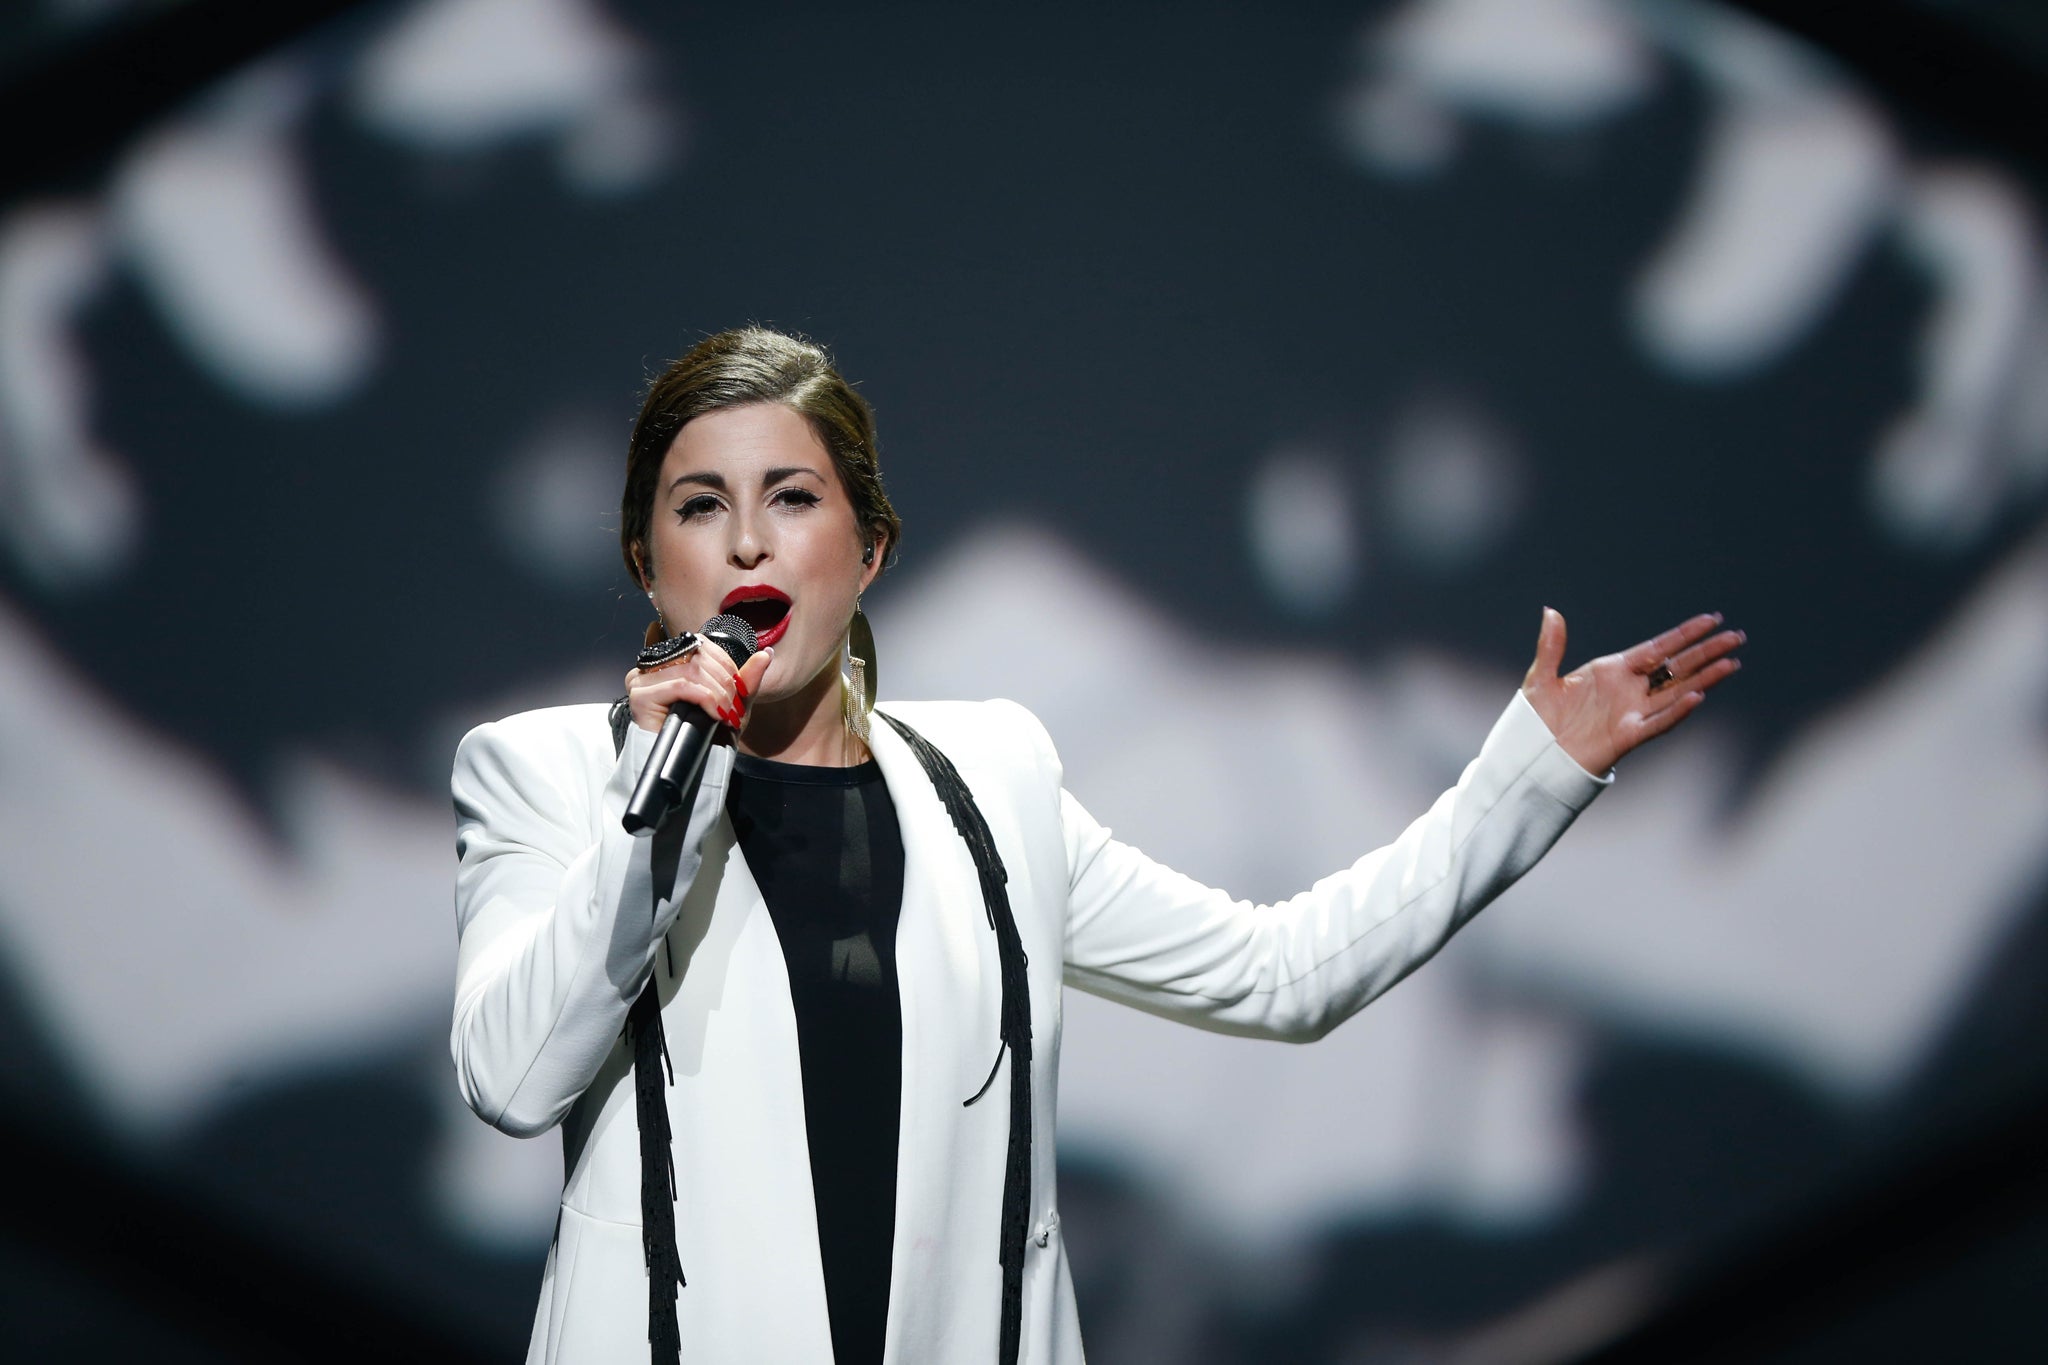 Ann Sophie performs 'Black Smoke' at the Eurovision Song Contest 2015